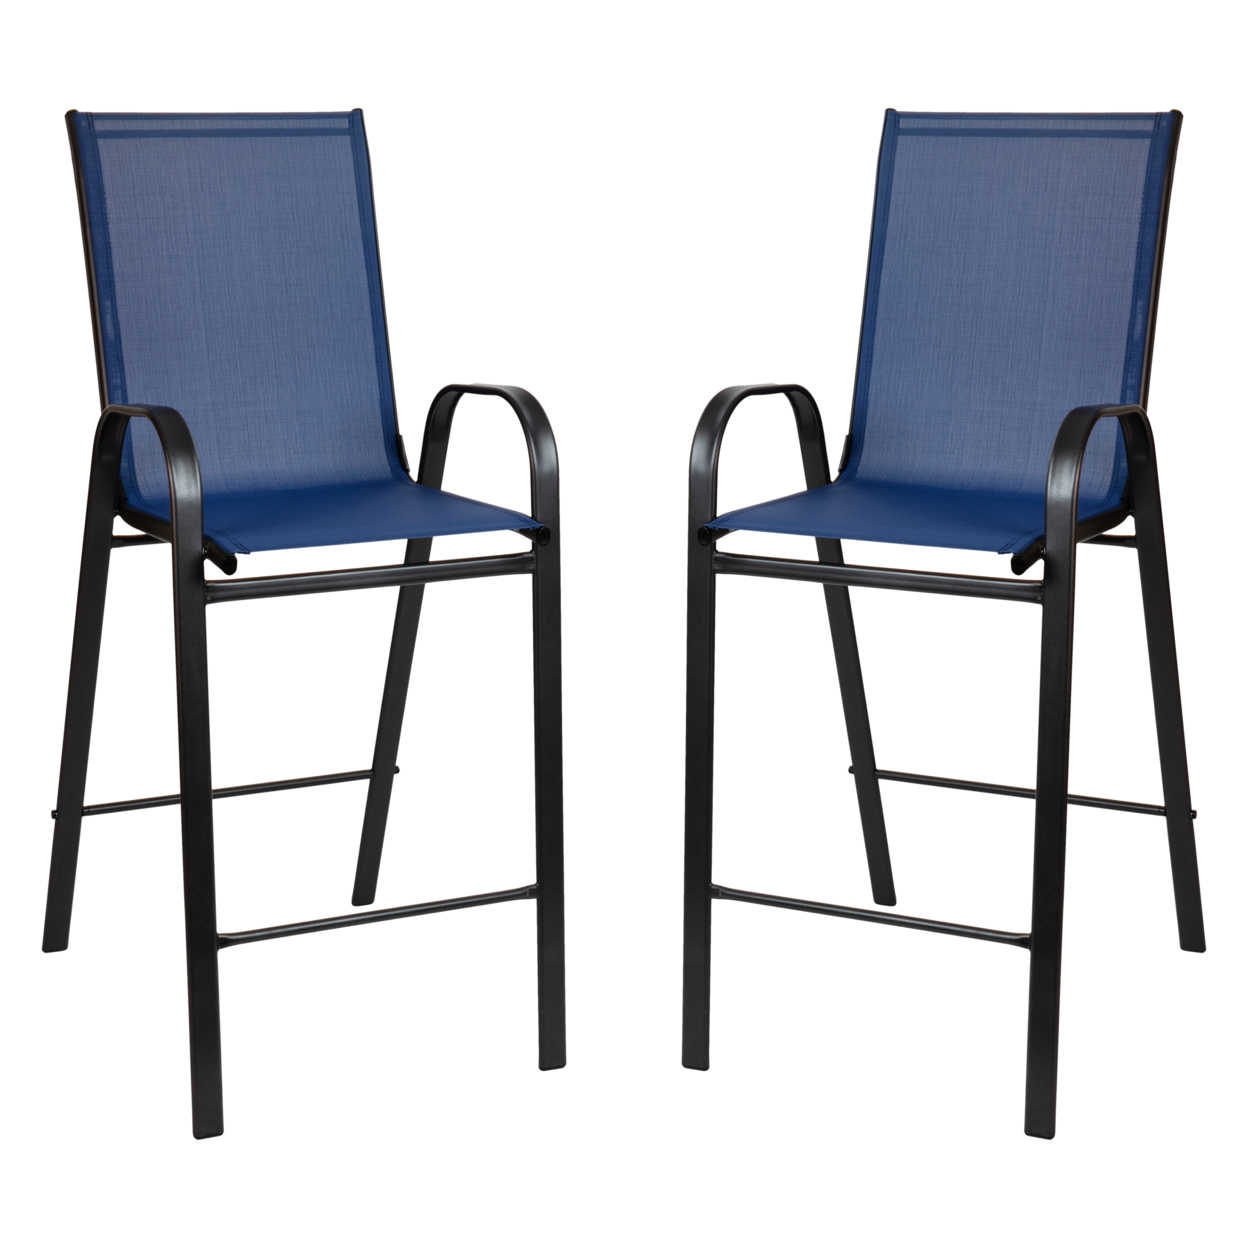 2 Pack Brazos Series Navy Stackable Outdoor Barstools With Flex Comfort Material And Metal Frame